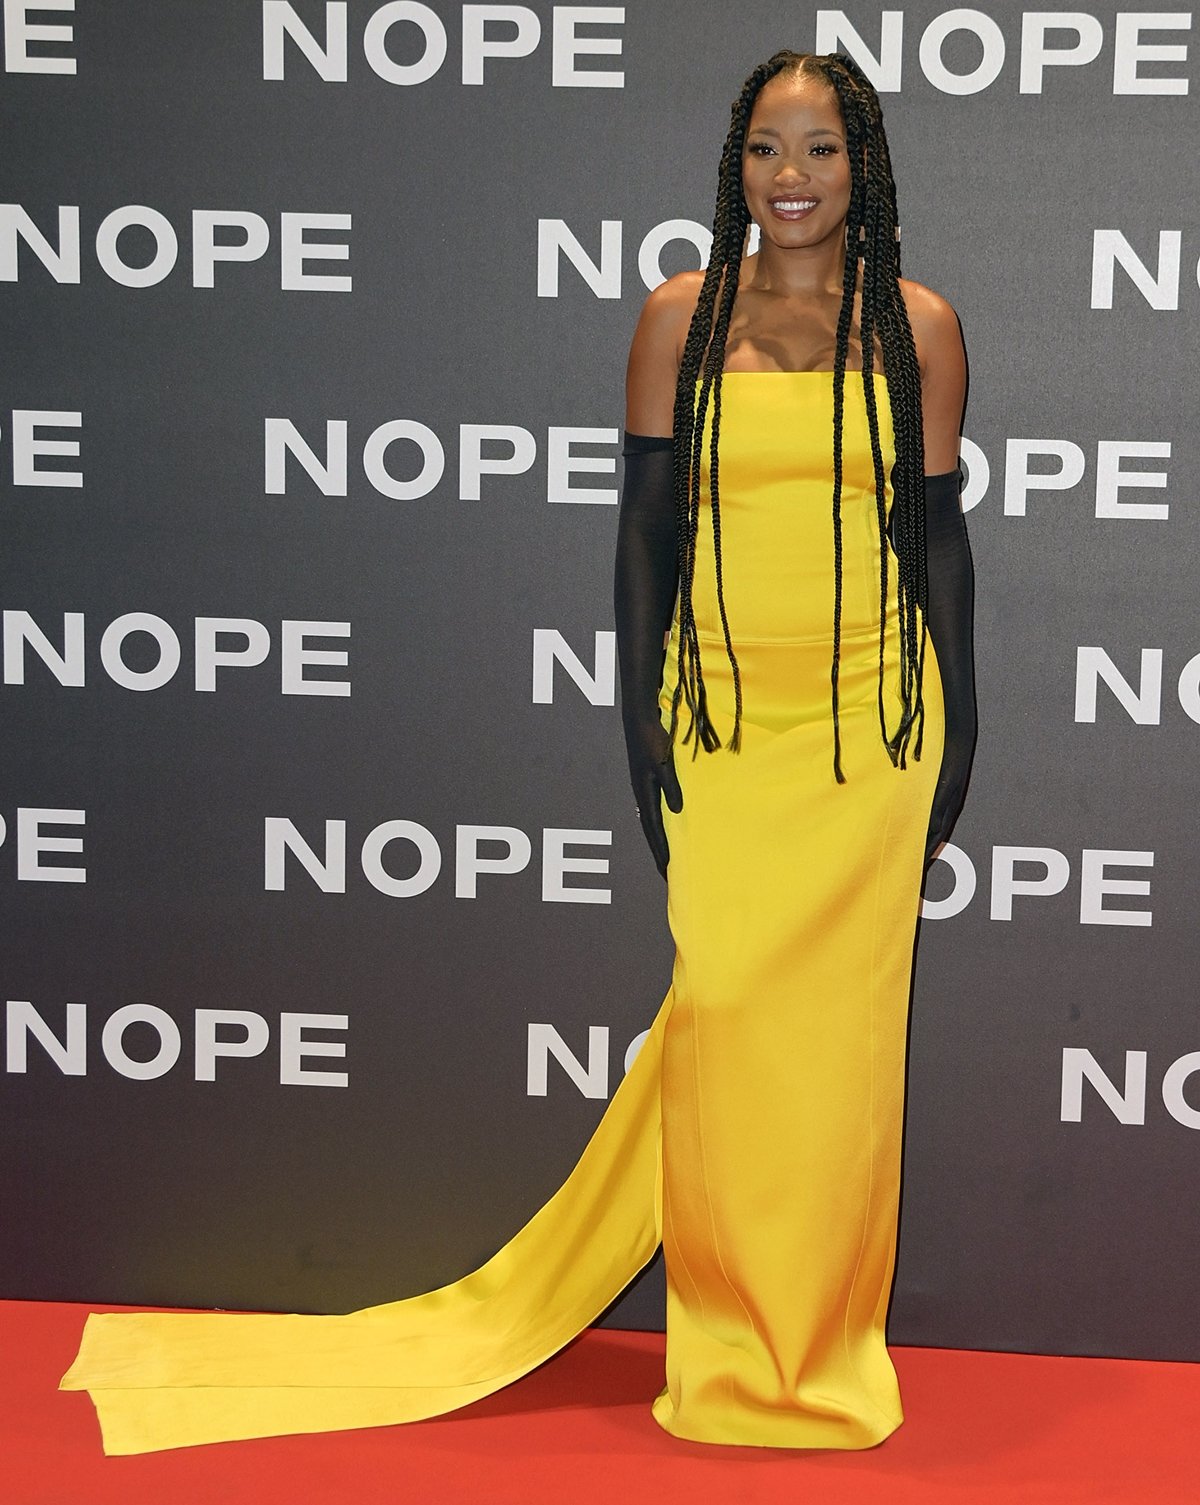 Keke Palmer in a yellow satin Prada dress and long gloves on the red carpet of the Italian premiere Nope